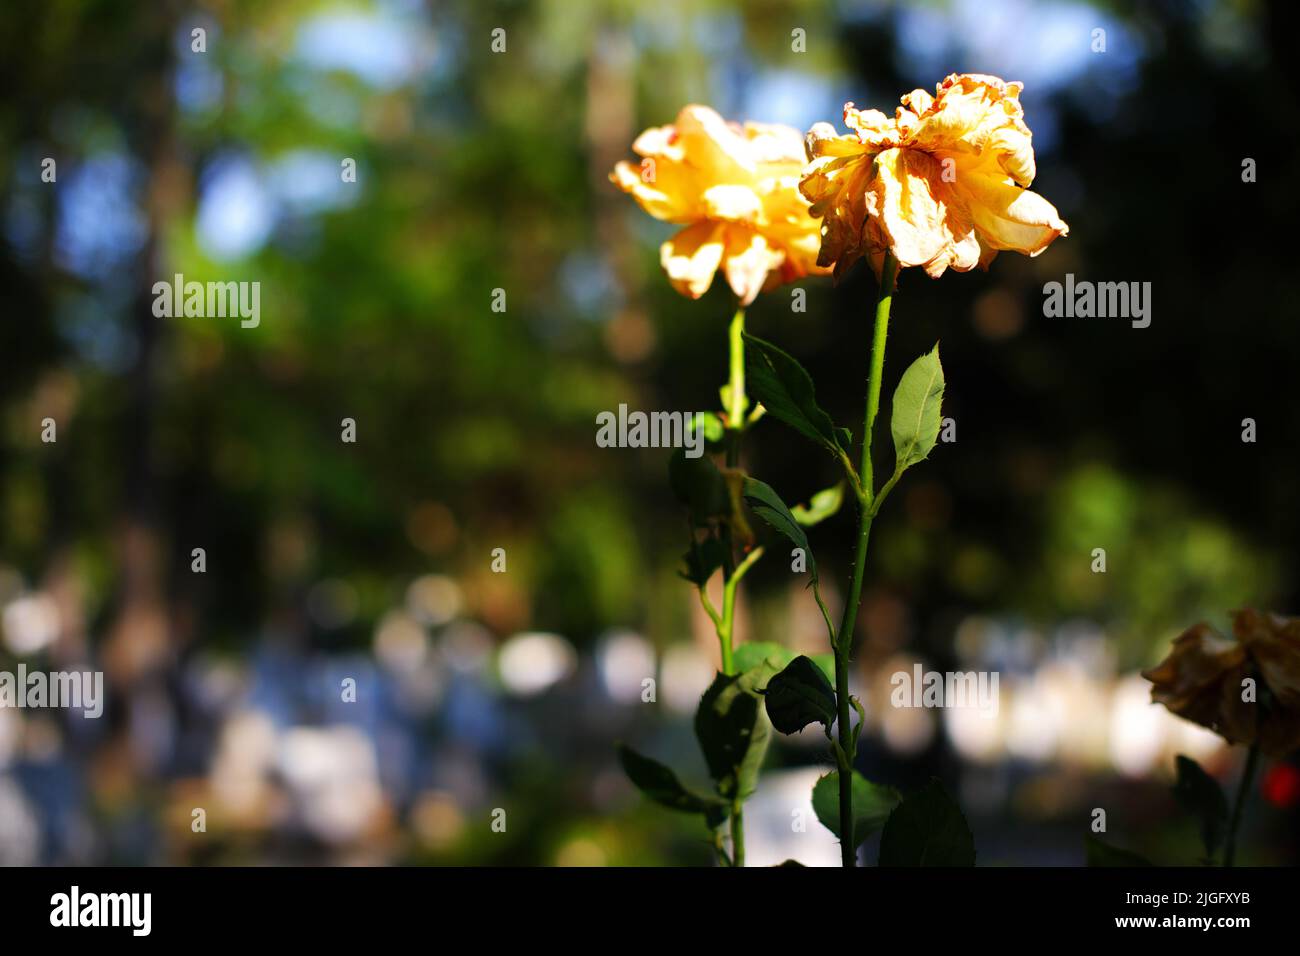 Yellow rose plant dried on branch bookeh with green background outdoor Stock Photo